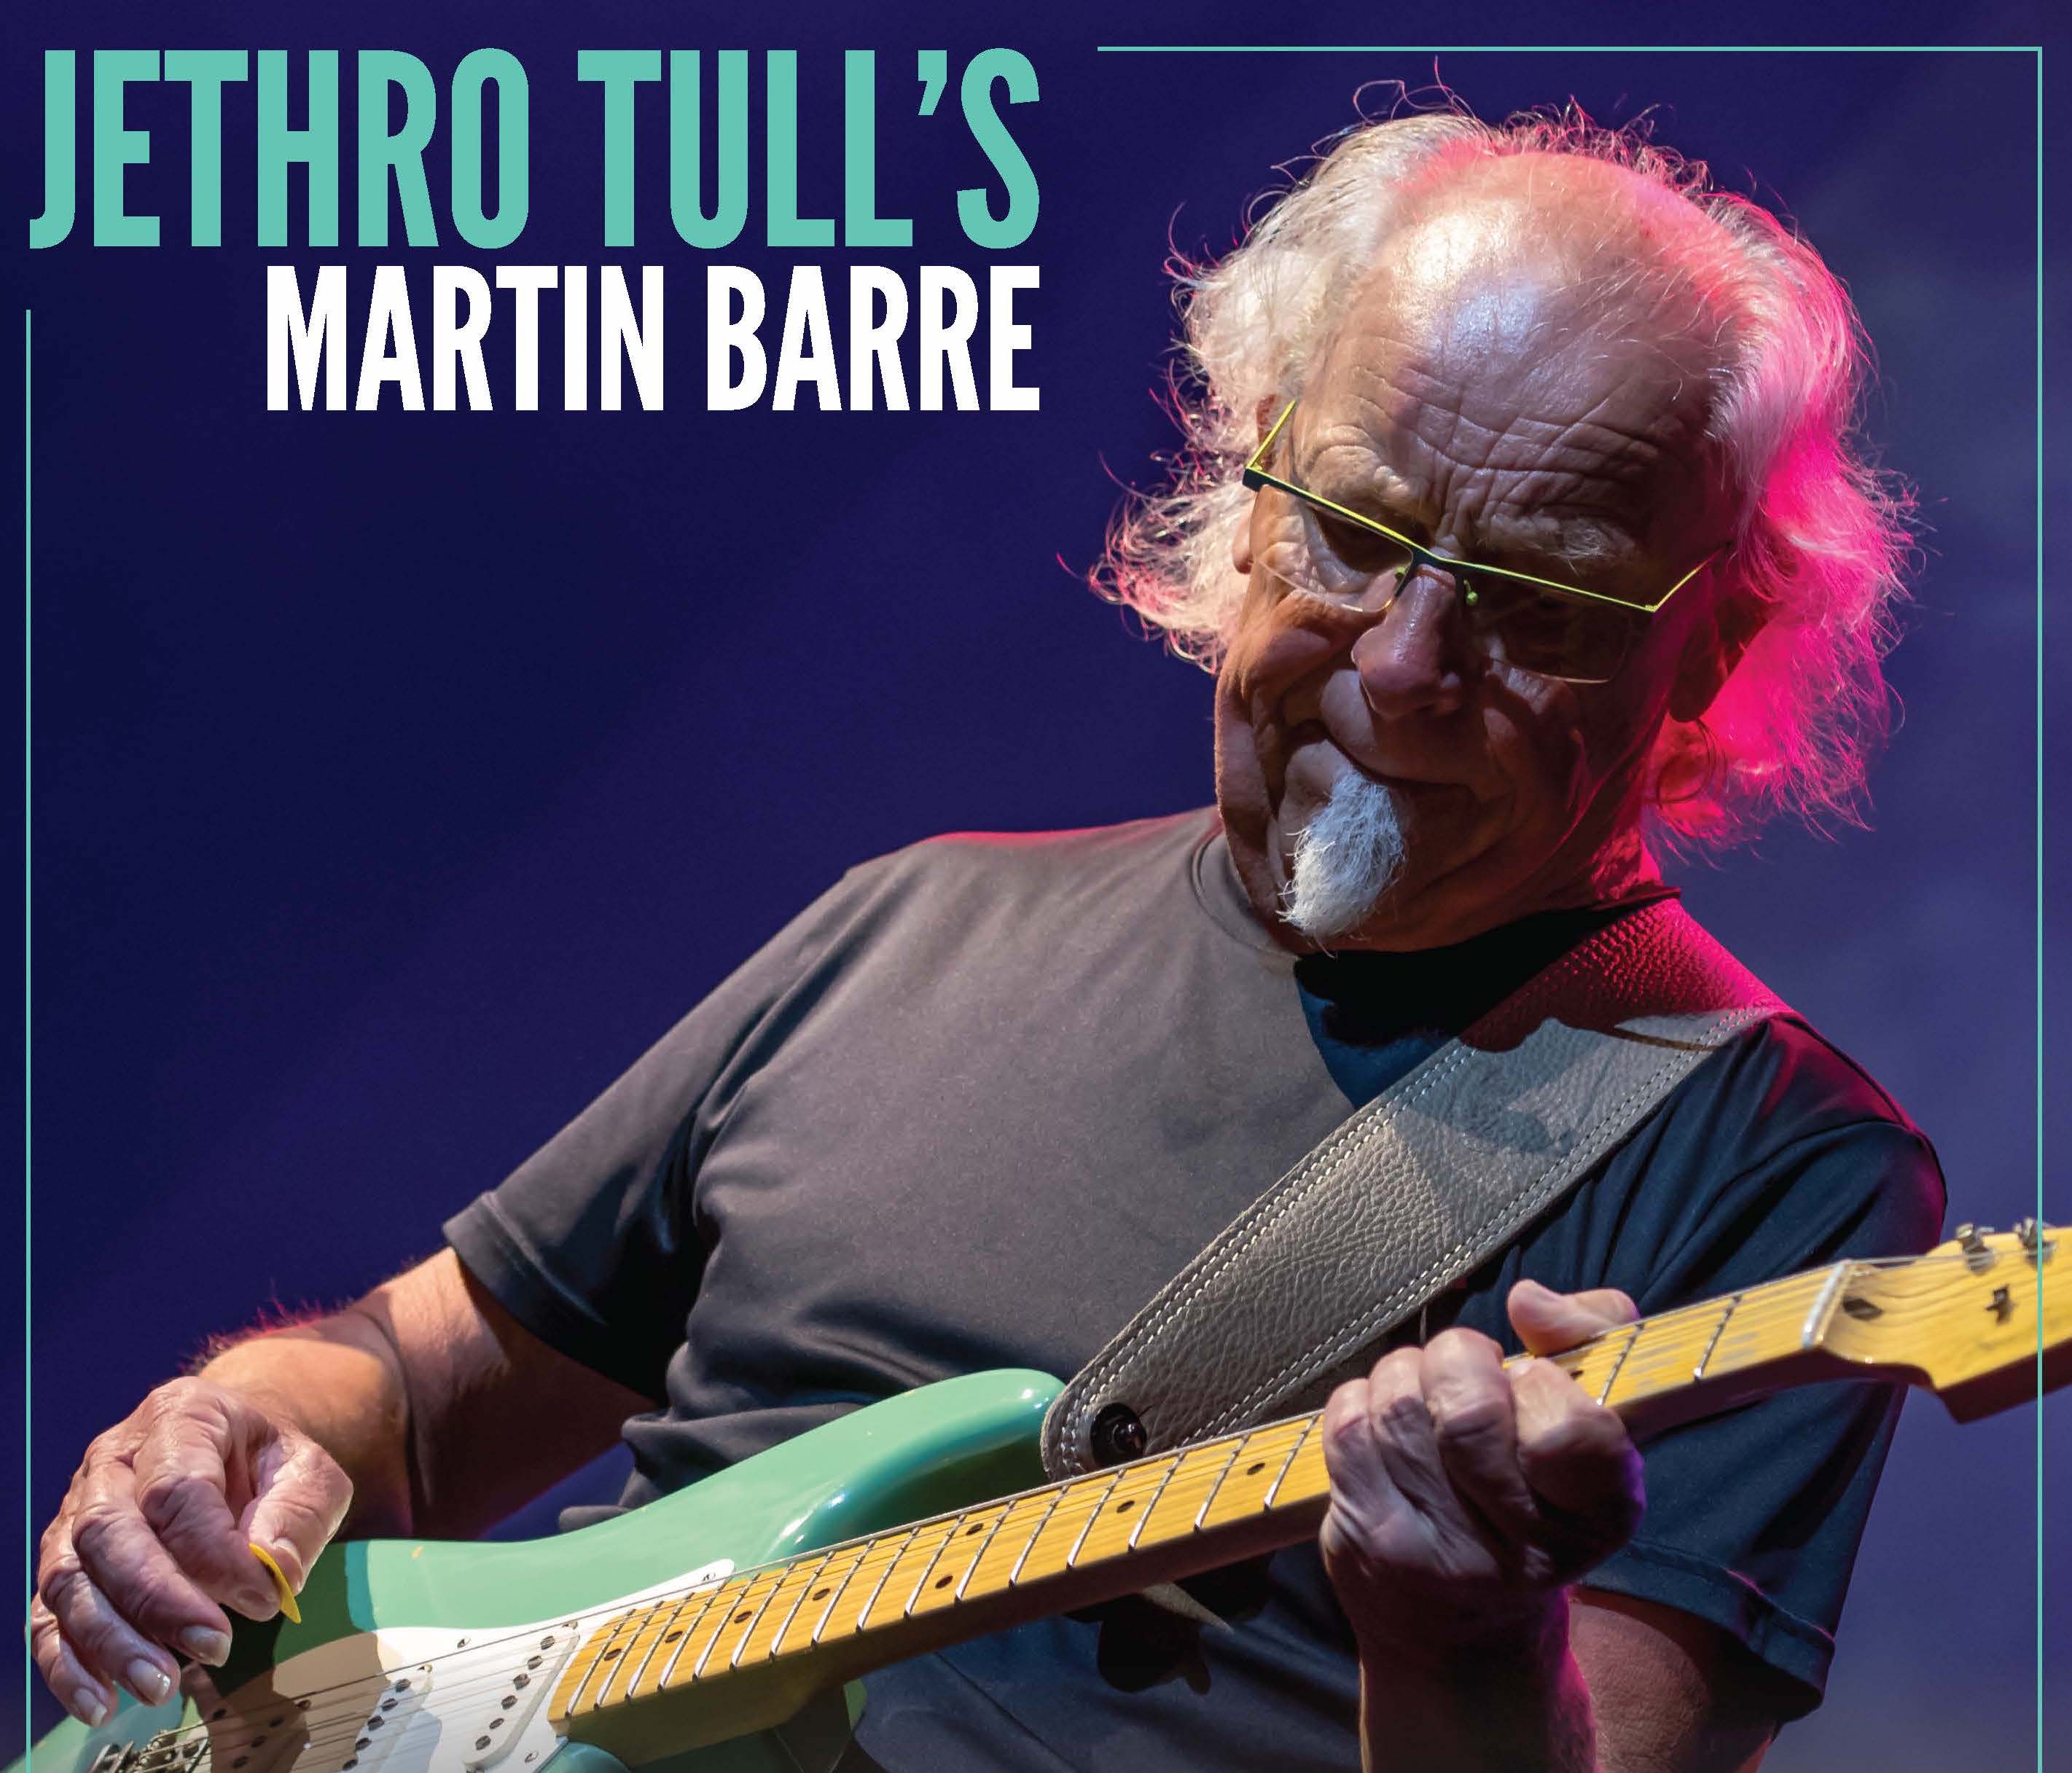 Image for MARTIN BARRE OF JETHRO TULL